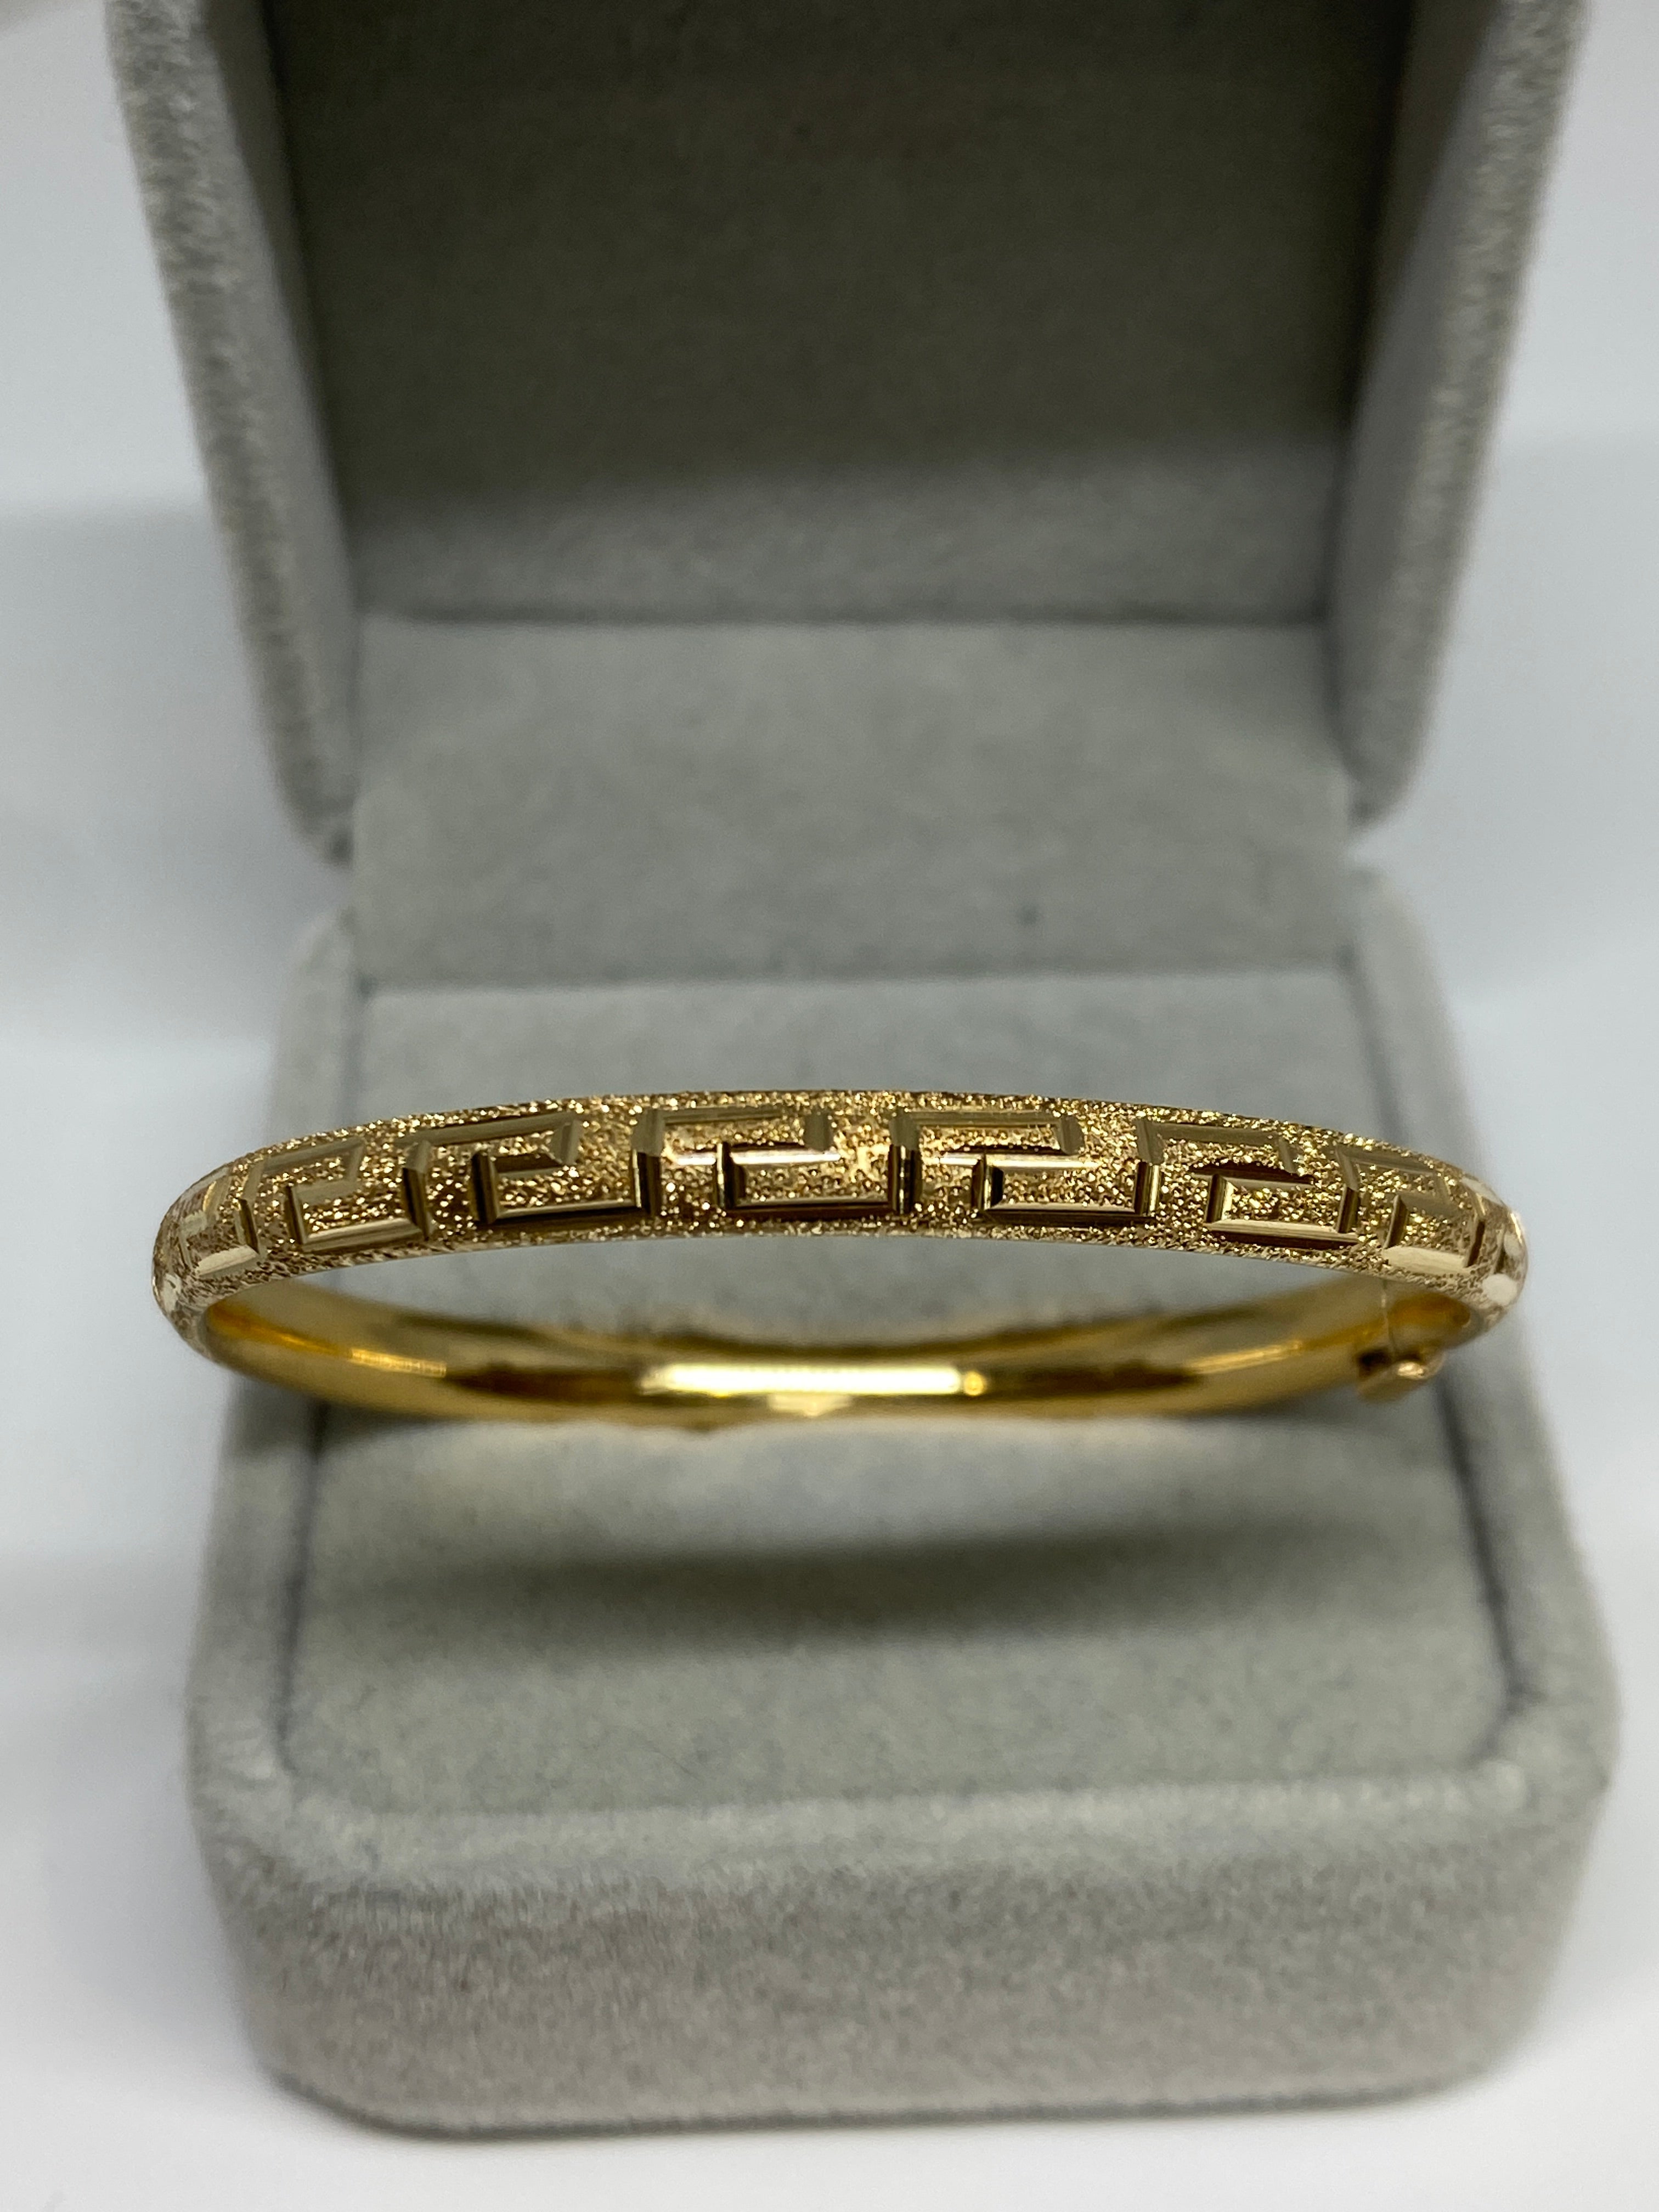 Charming small bangle in luminous 14k yellow gold.
It features a beautiful rounded convex shape with textured finish and classic etched greek key design.  Push clasp with under side safety catch

Stunning on it's own or worn in a stack.  This is a